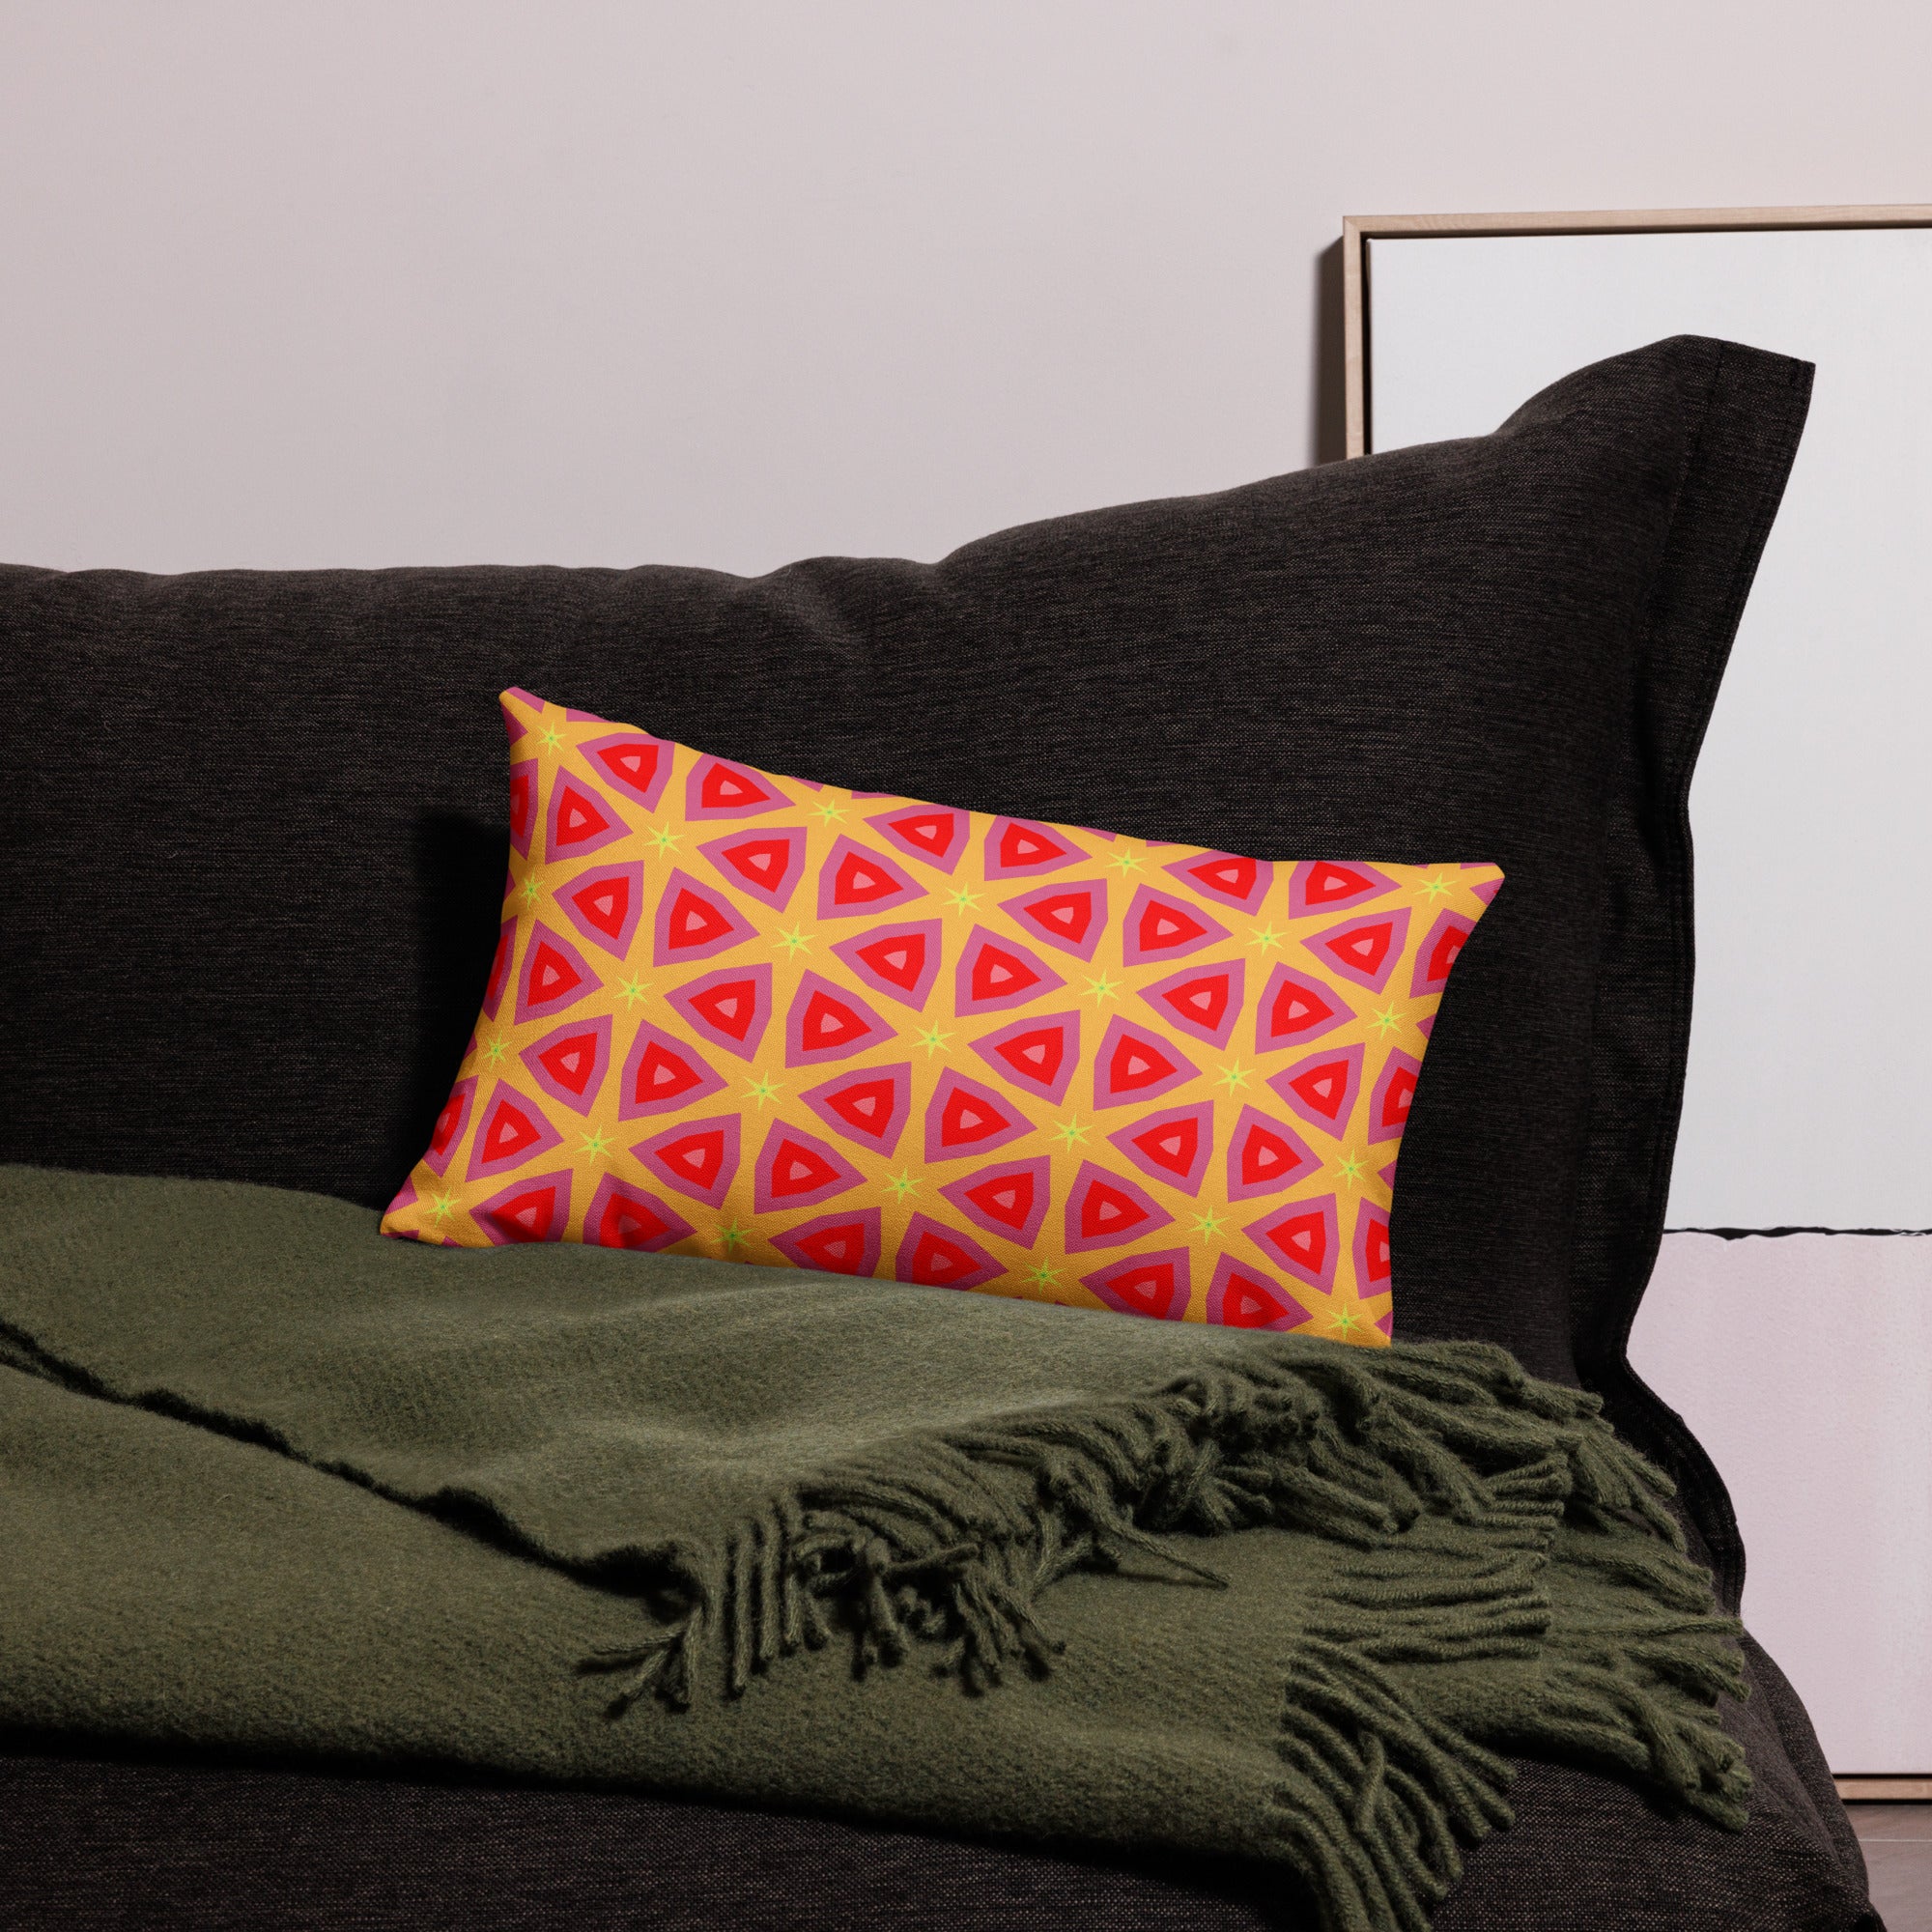 Close-up of the Geometric Harmony Premium Accent Pillow with intricate patterns.